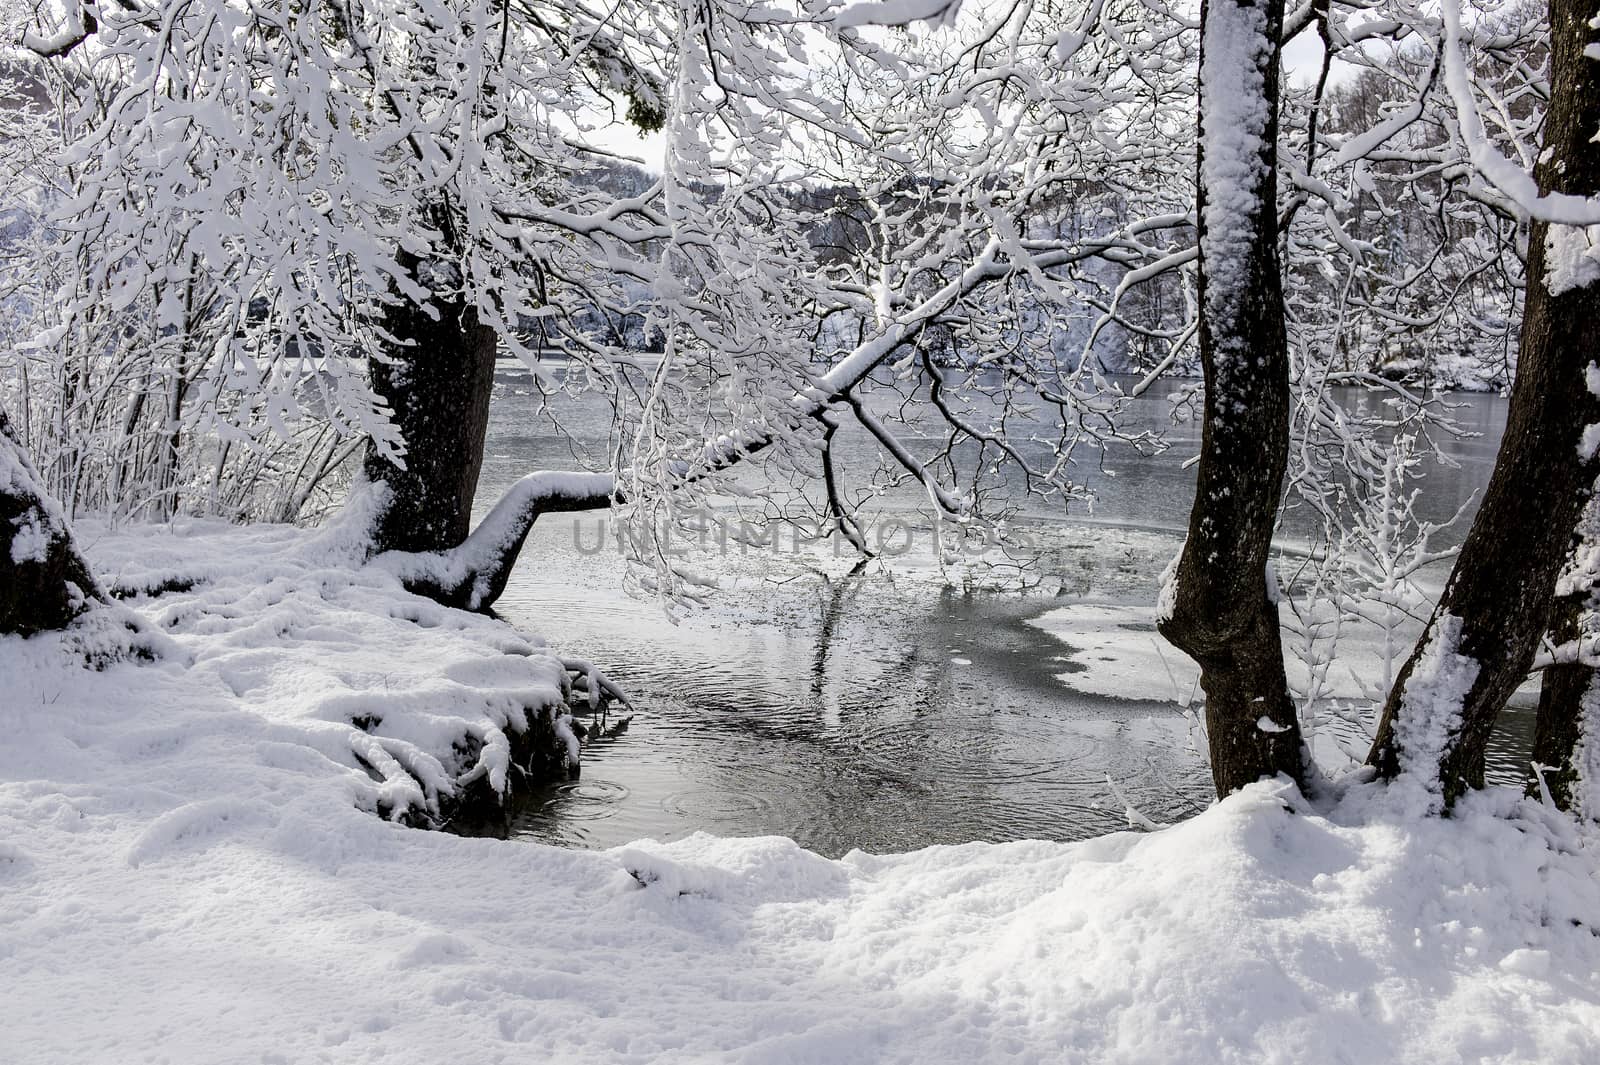 Winter pond behind the snow-covered trees.